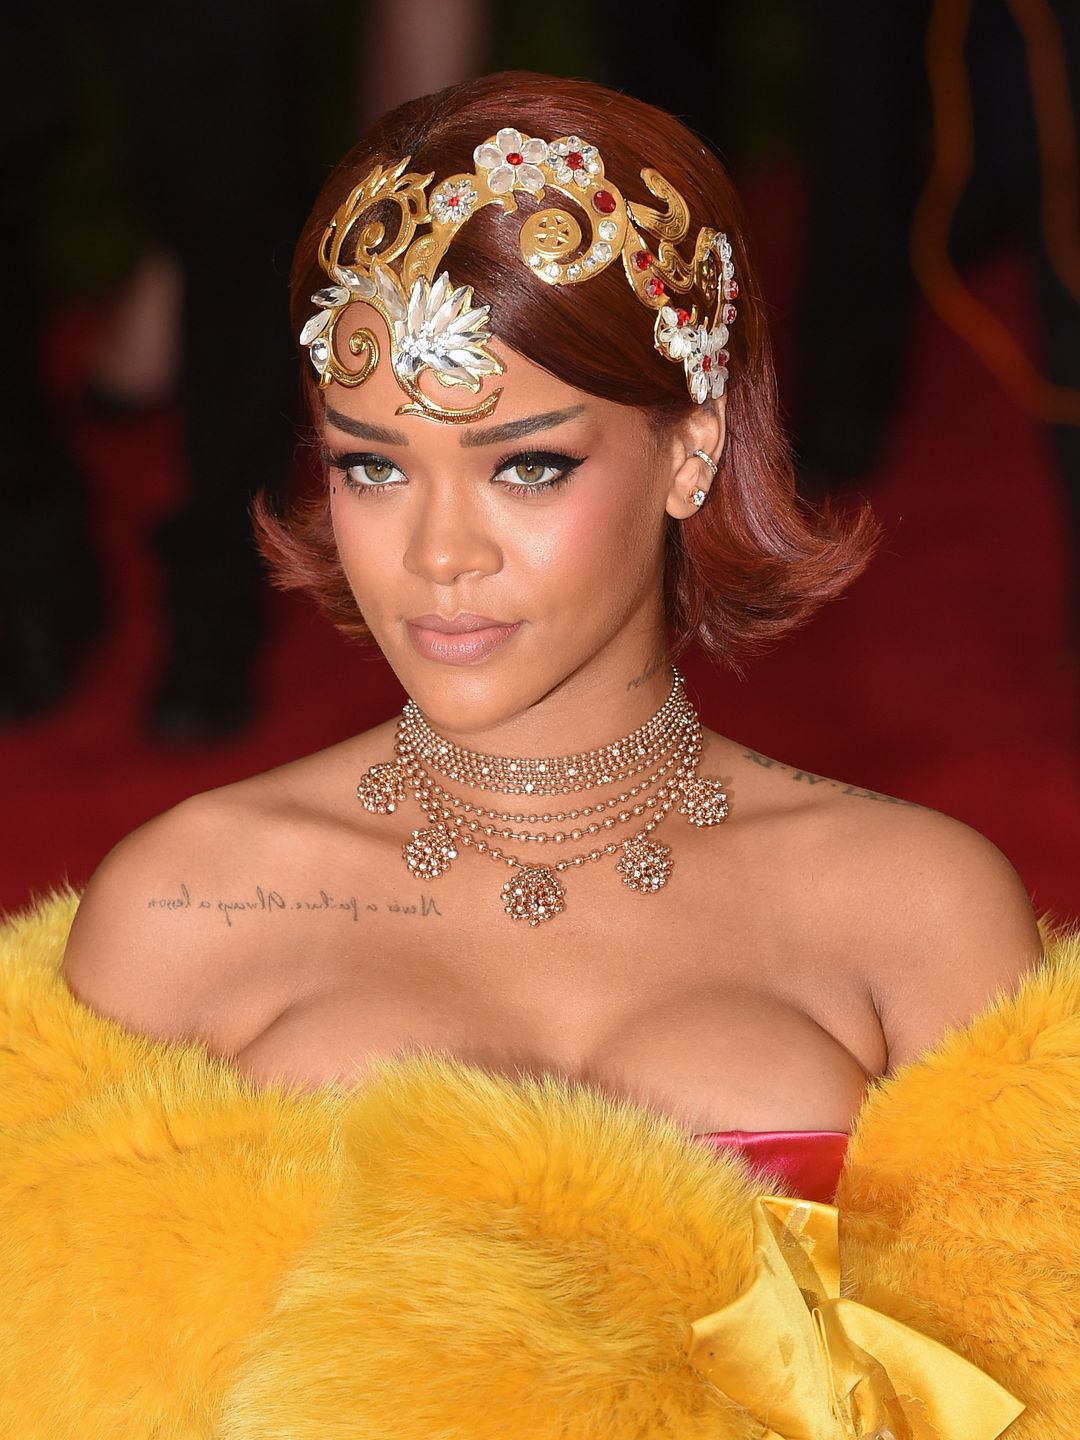 Rihanna attends the "China: Through The Looking Glass" Costume Institute Benefit Gala at Metropolitan Museum of Art on May 4, 2015